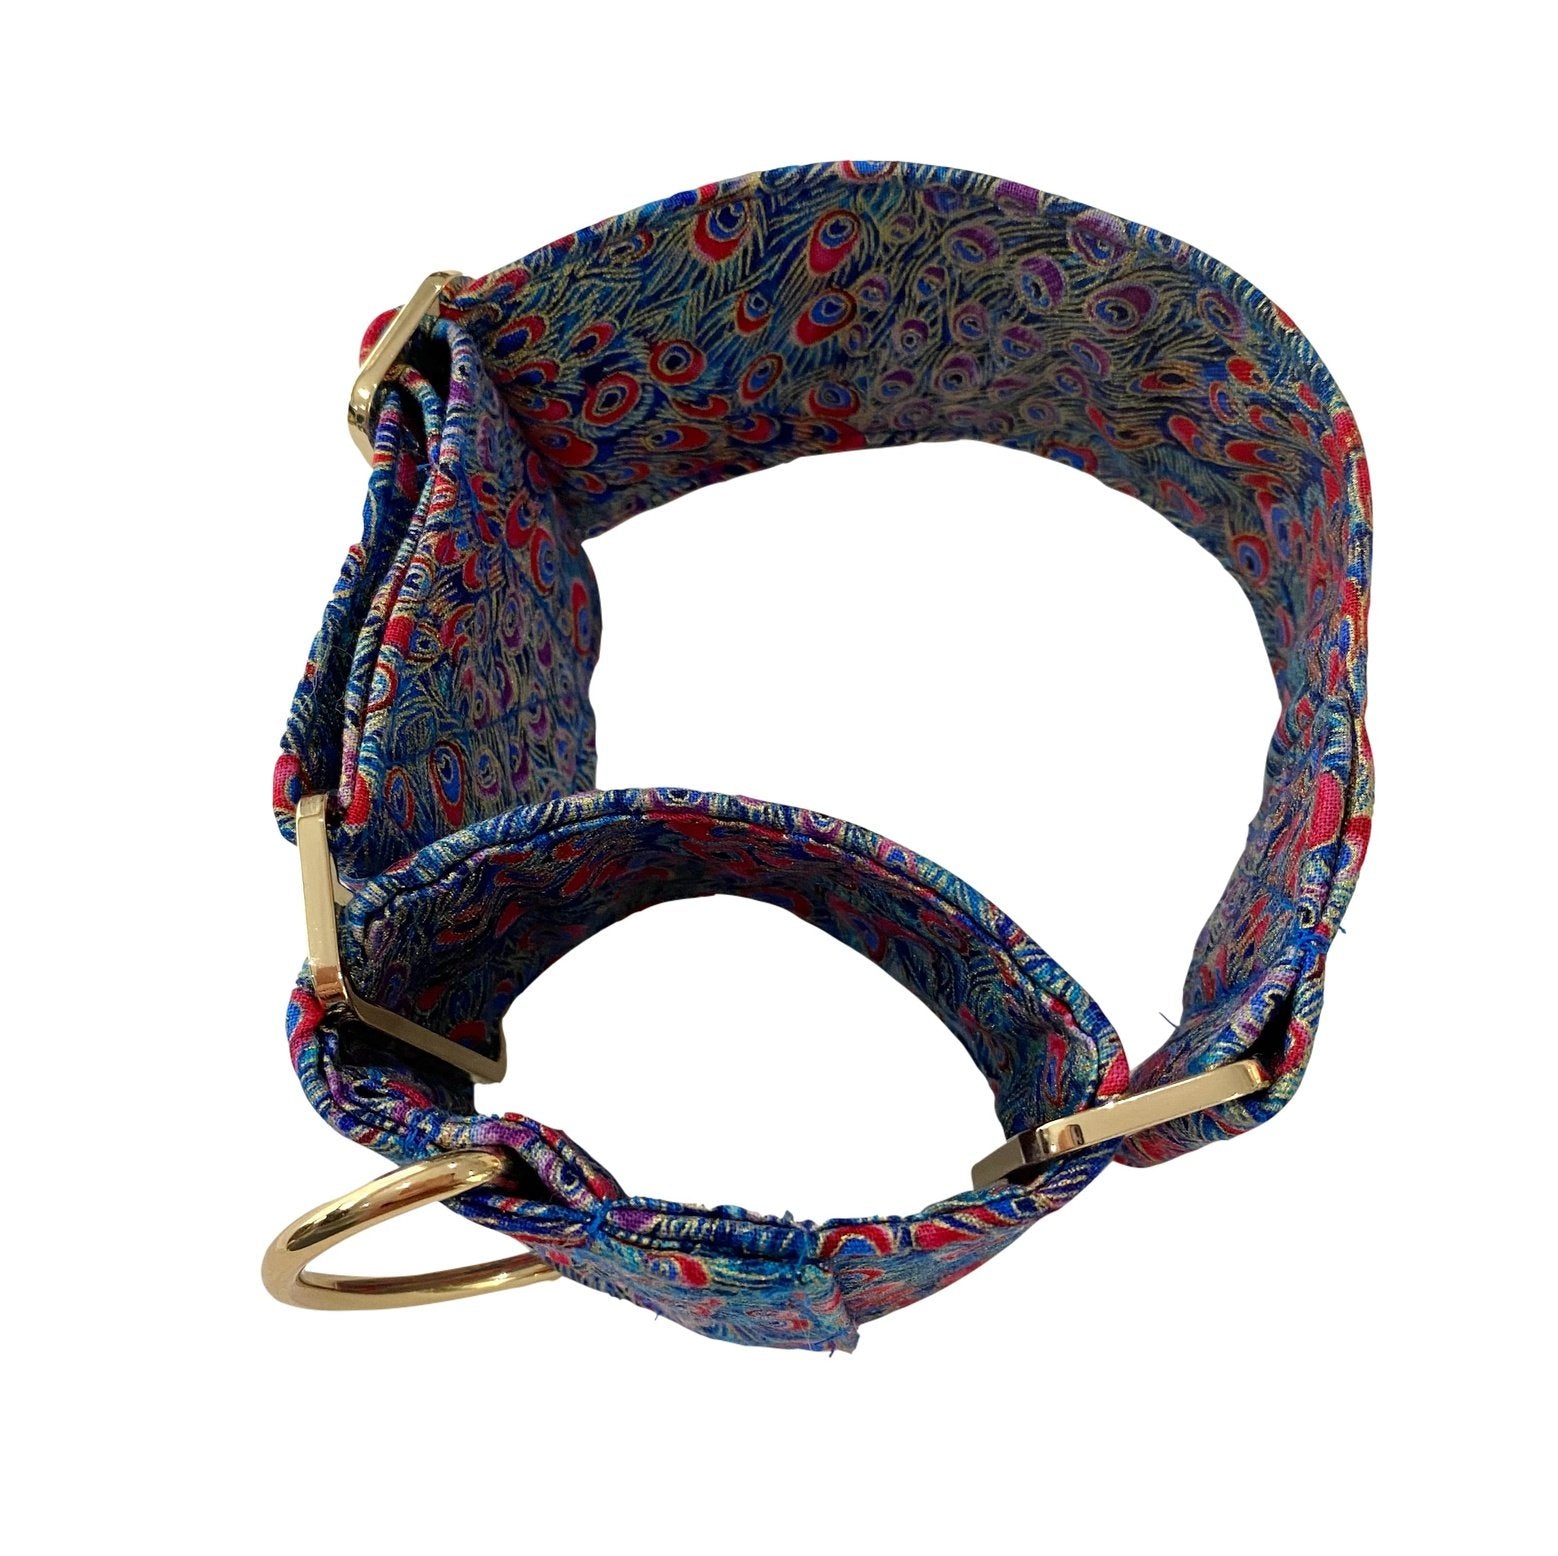 Peacock Blue Martingale Dog Collar: 5cm wide - info-0712